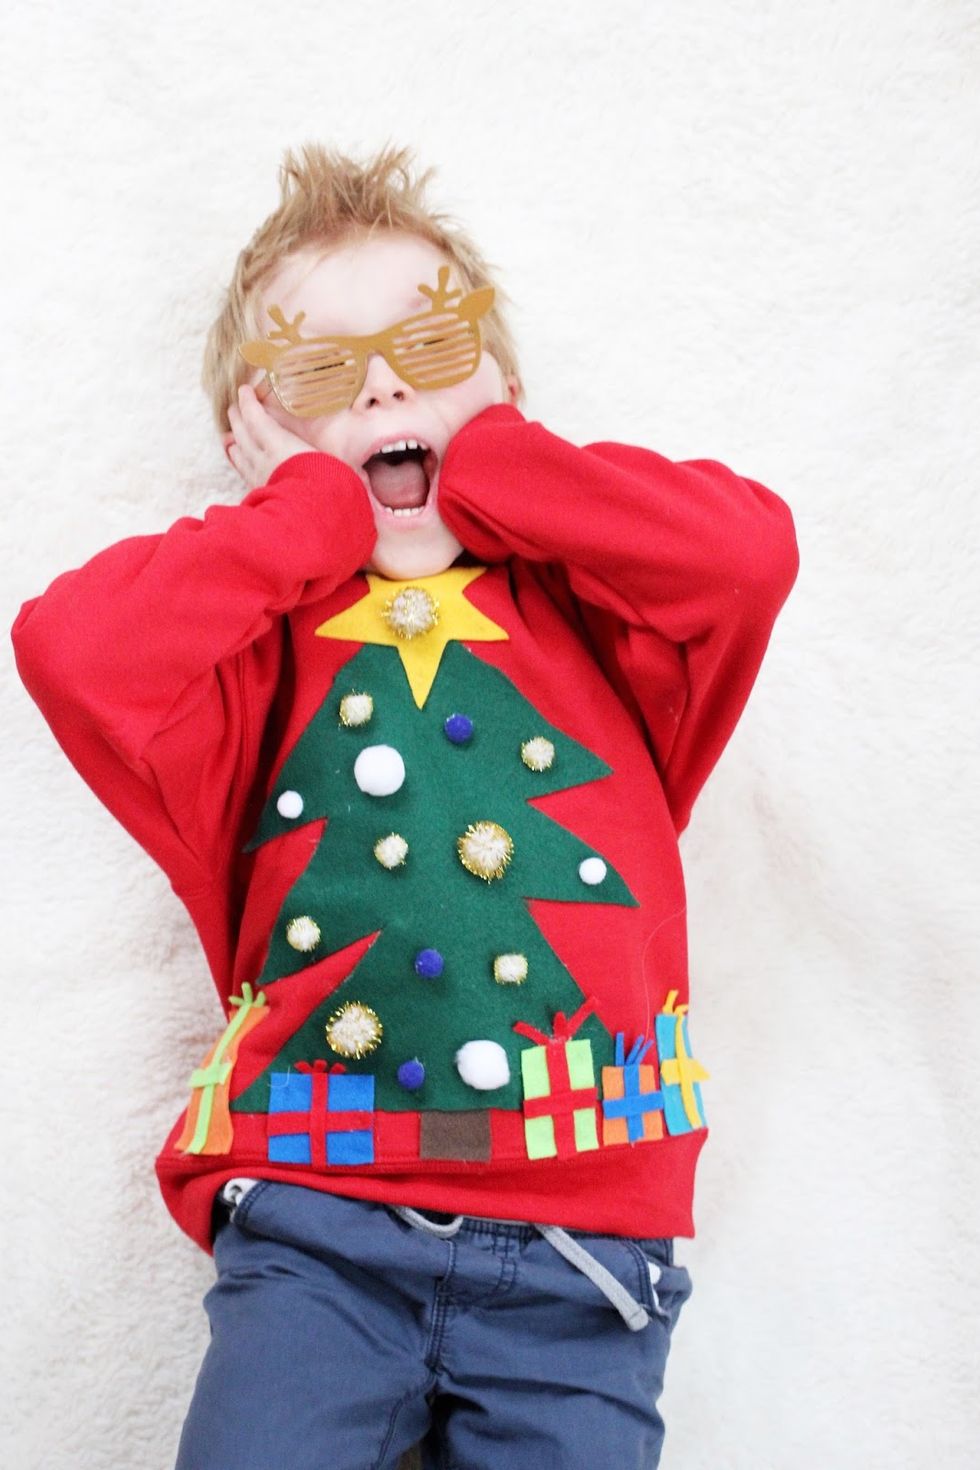 Six DIY Ugly Christmas Sweater Ideas That are Super Easy to Make